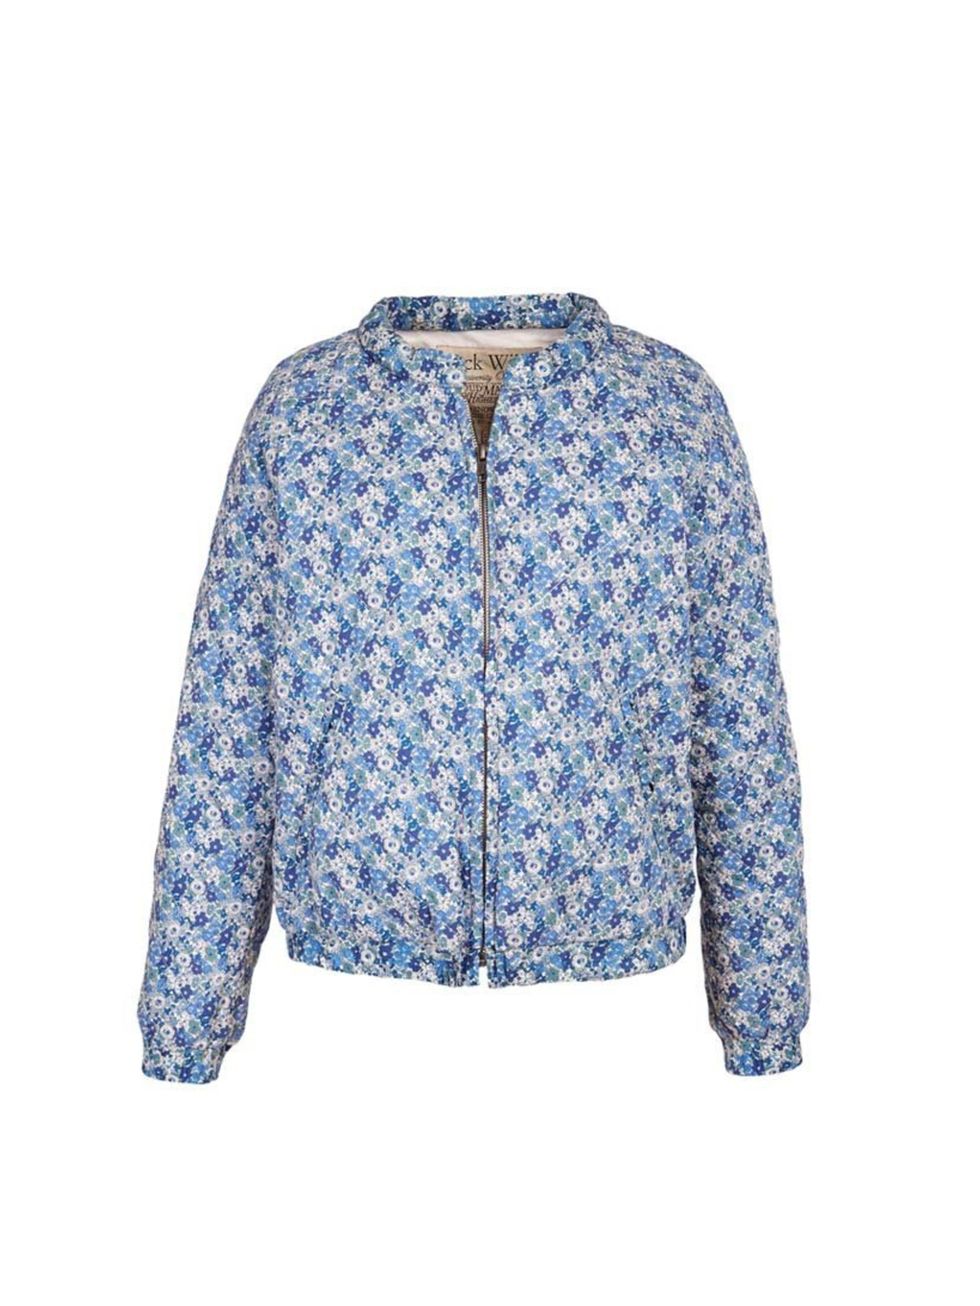 <p>Because Liberty prints are always a winner.</p><p><a href="http://www.jackwills.com/en-gb/look-book/liberty/">Jack Wills</a> jacket, £98.50</p>